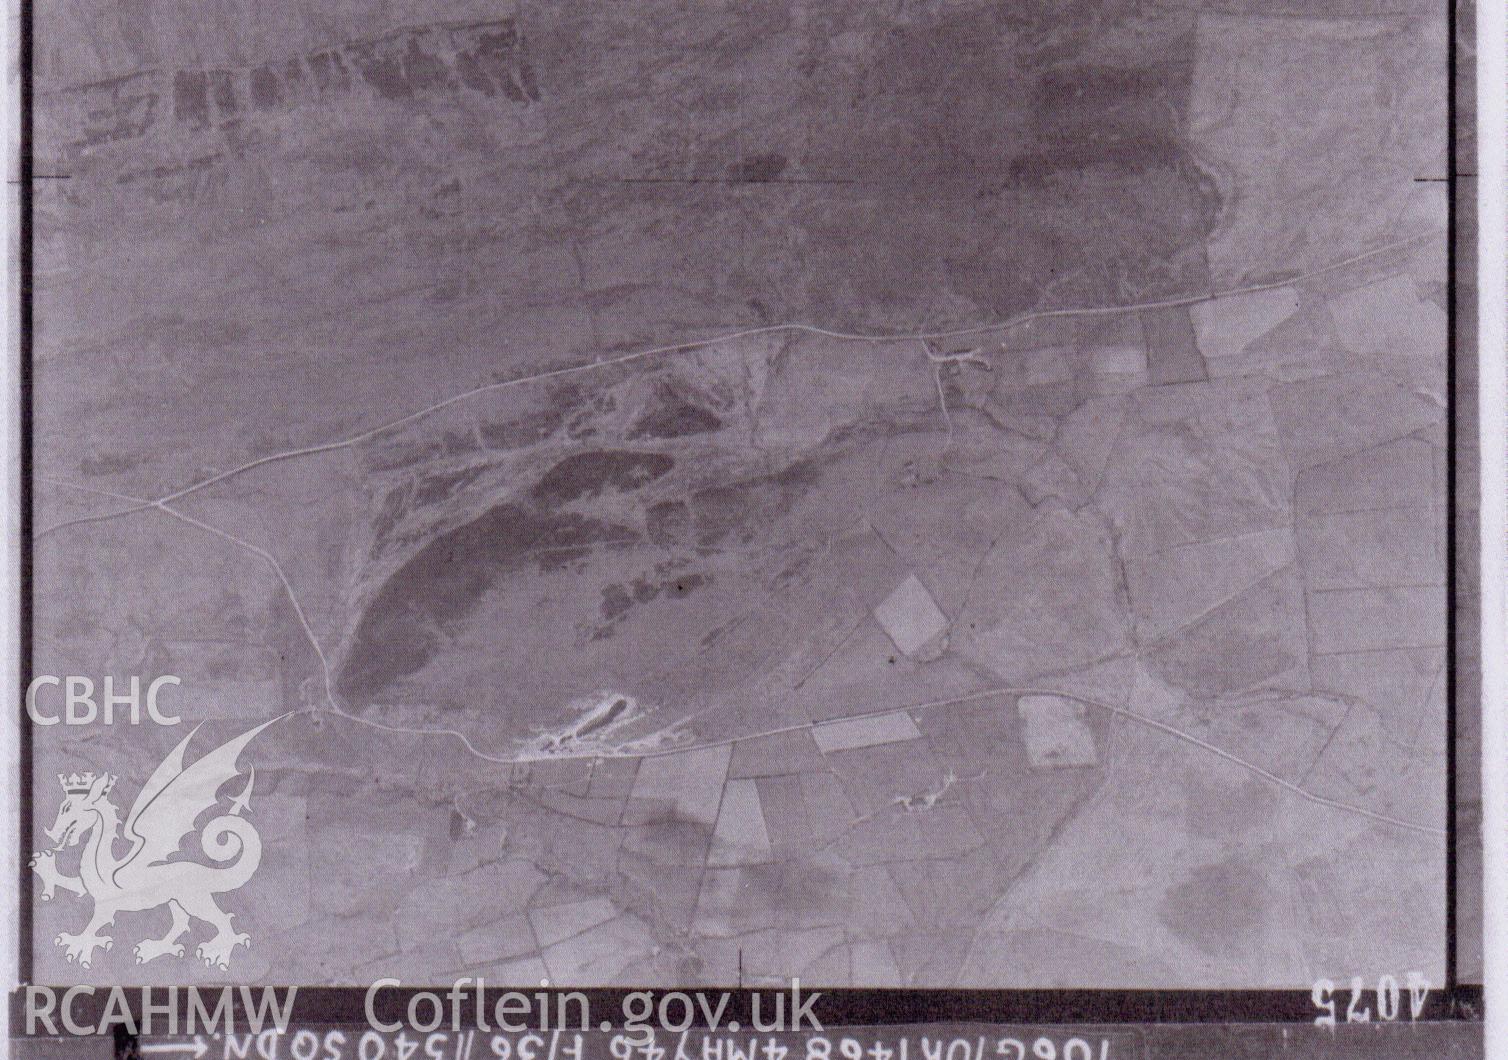 1946 Aerial photograph showing assessment area for Tan y Foel Quarry, Cefn Coch, report no. 1089.